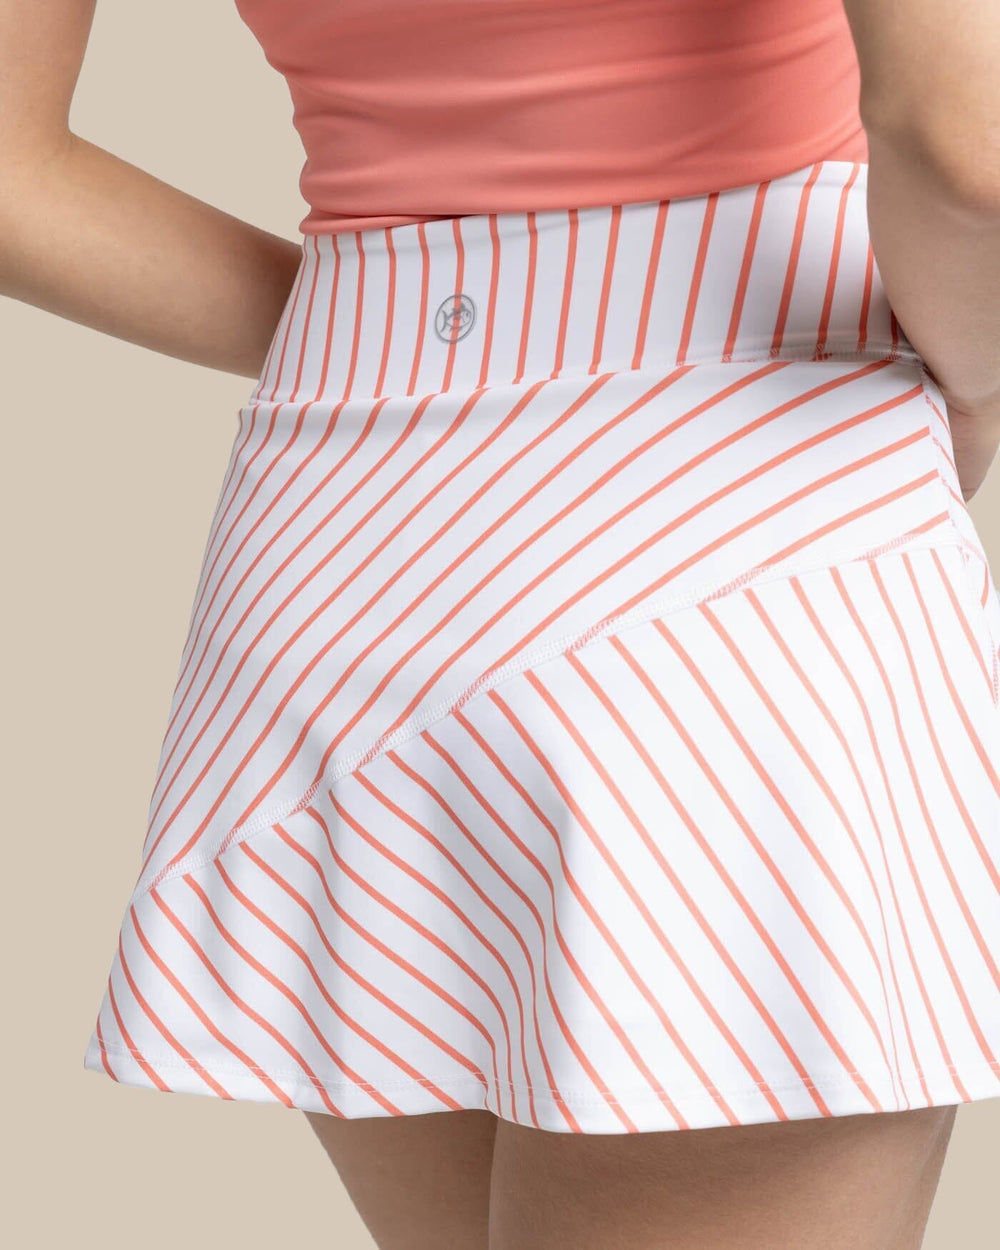 The detail view of the Southern Tide Katlyn Stripe Skort by Southern Tide - Classic White